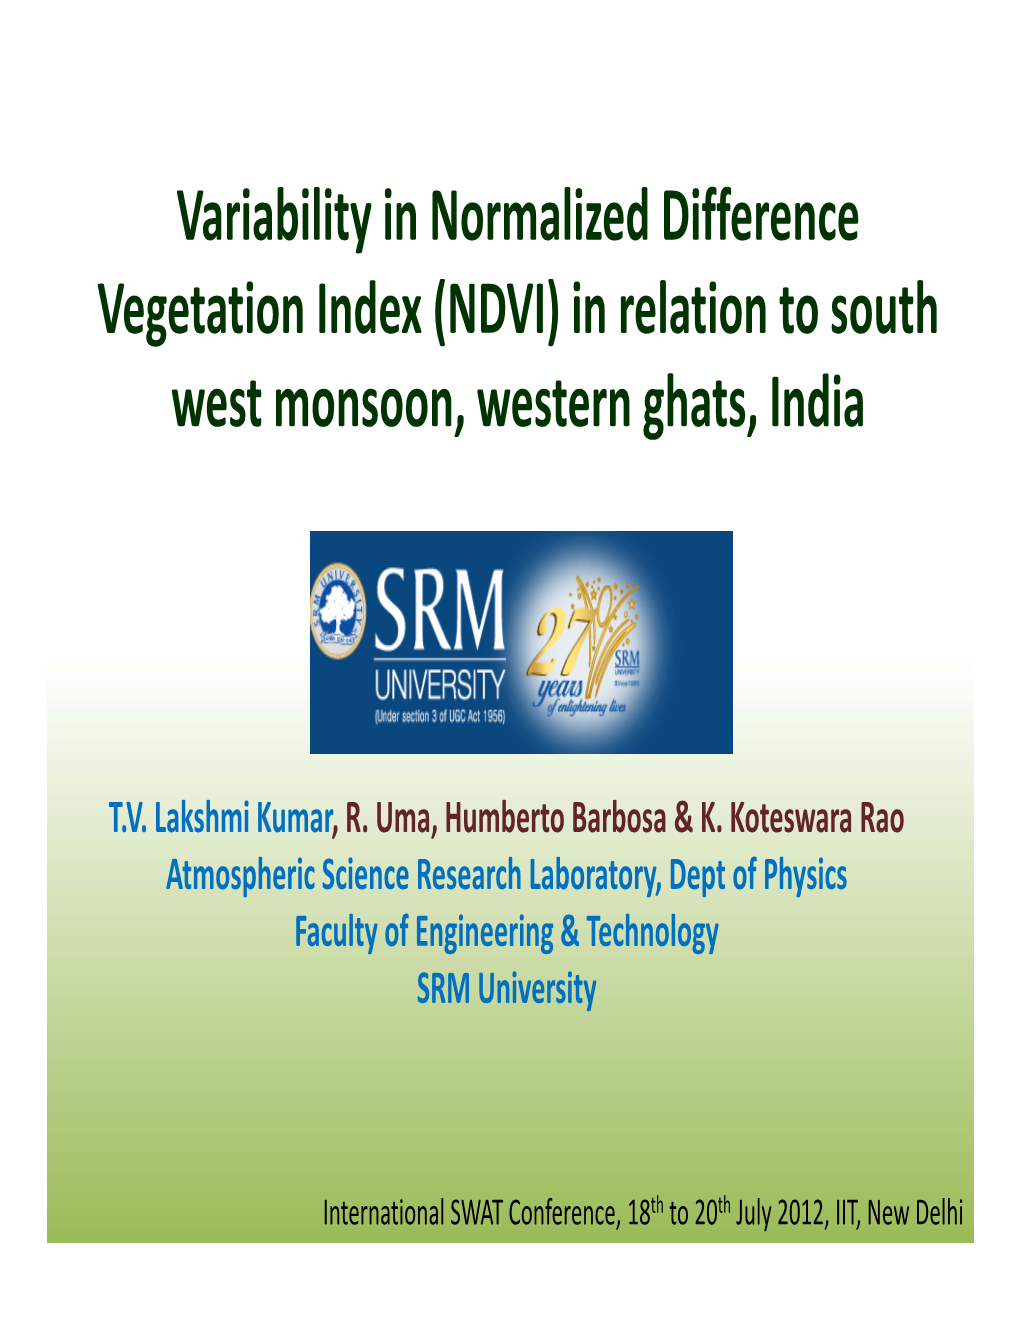 Variability in Normalized Difference Vegetation Index (NDVI) in Relation to South West Monsoon, Western Ghats, India